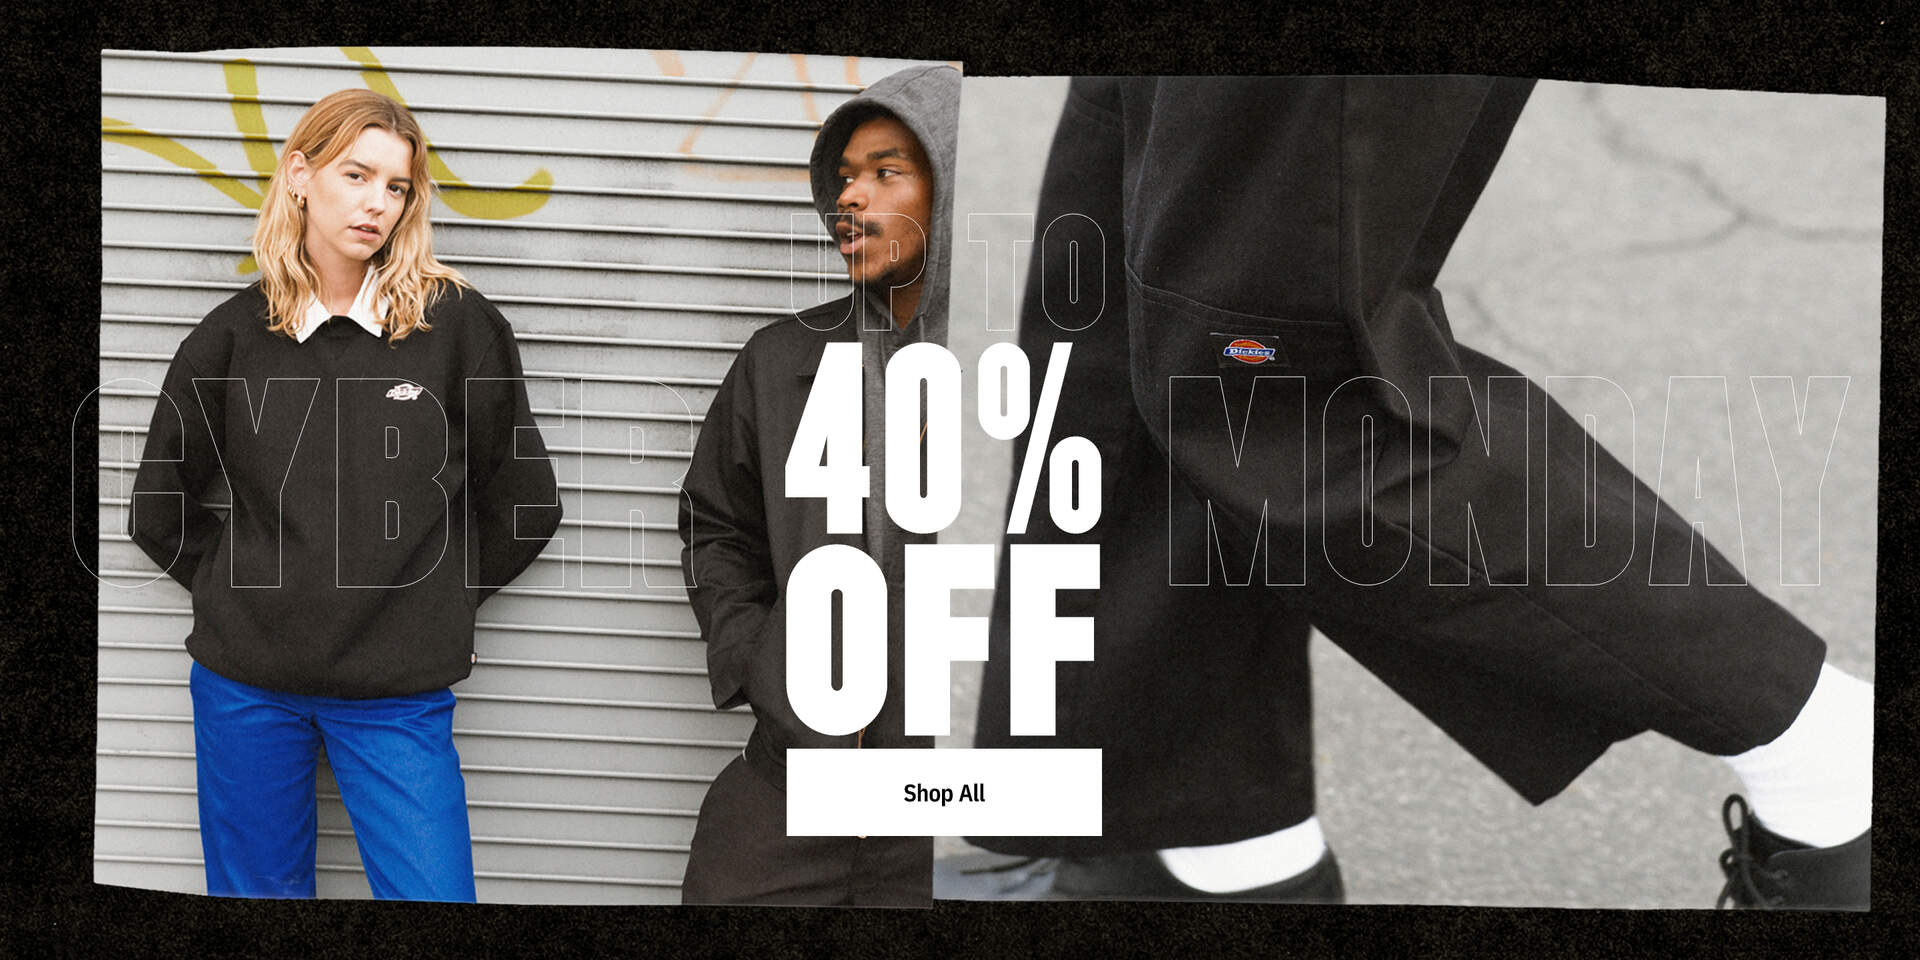 cyber Monday 40% off shop all